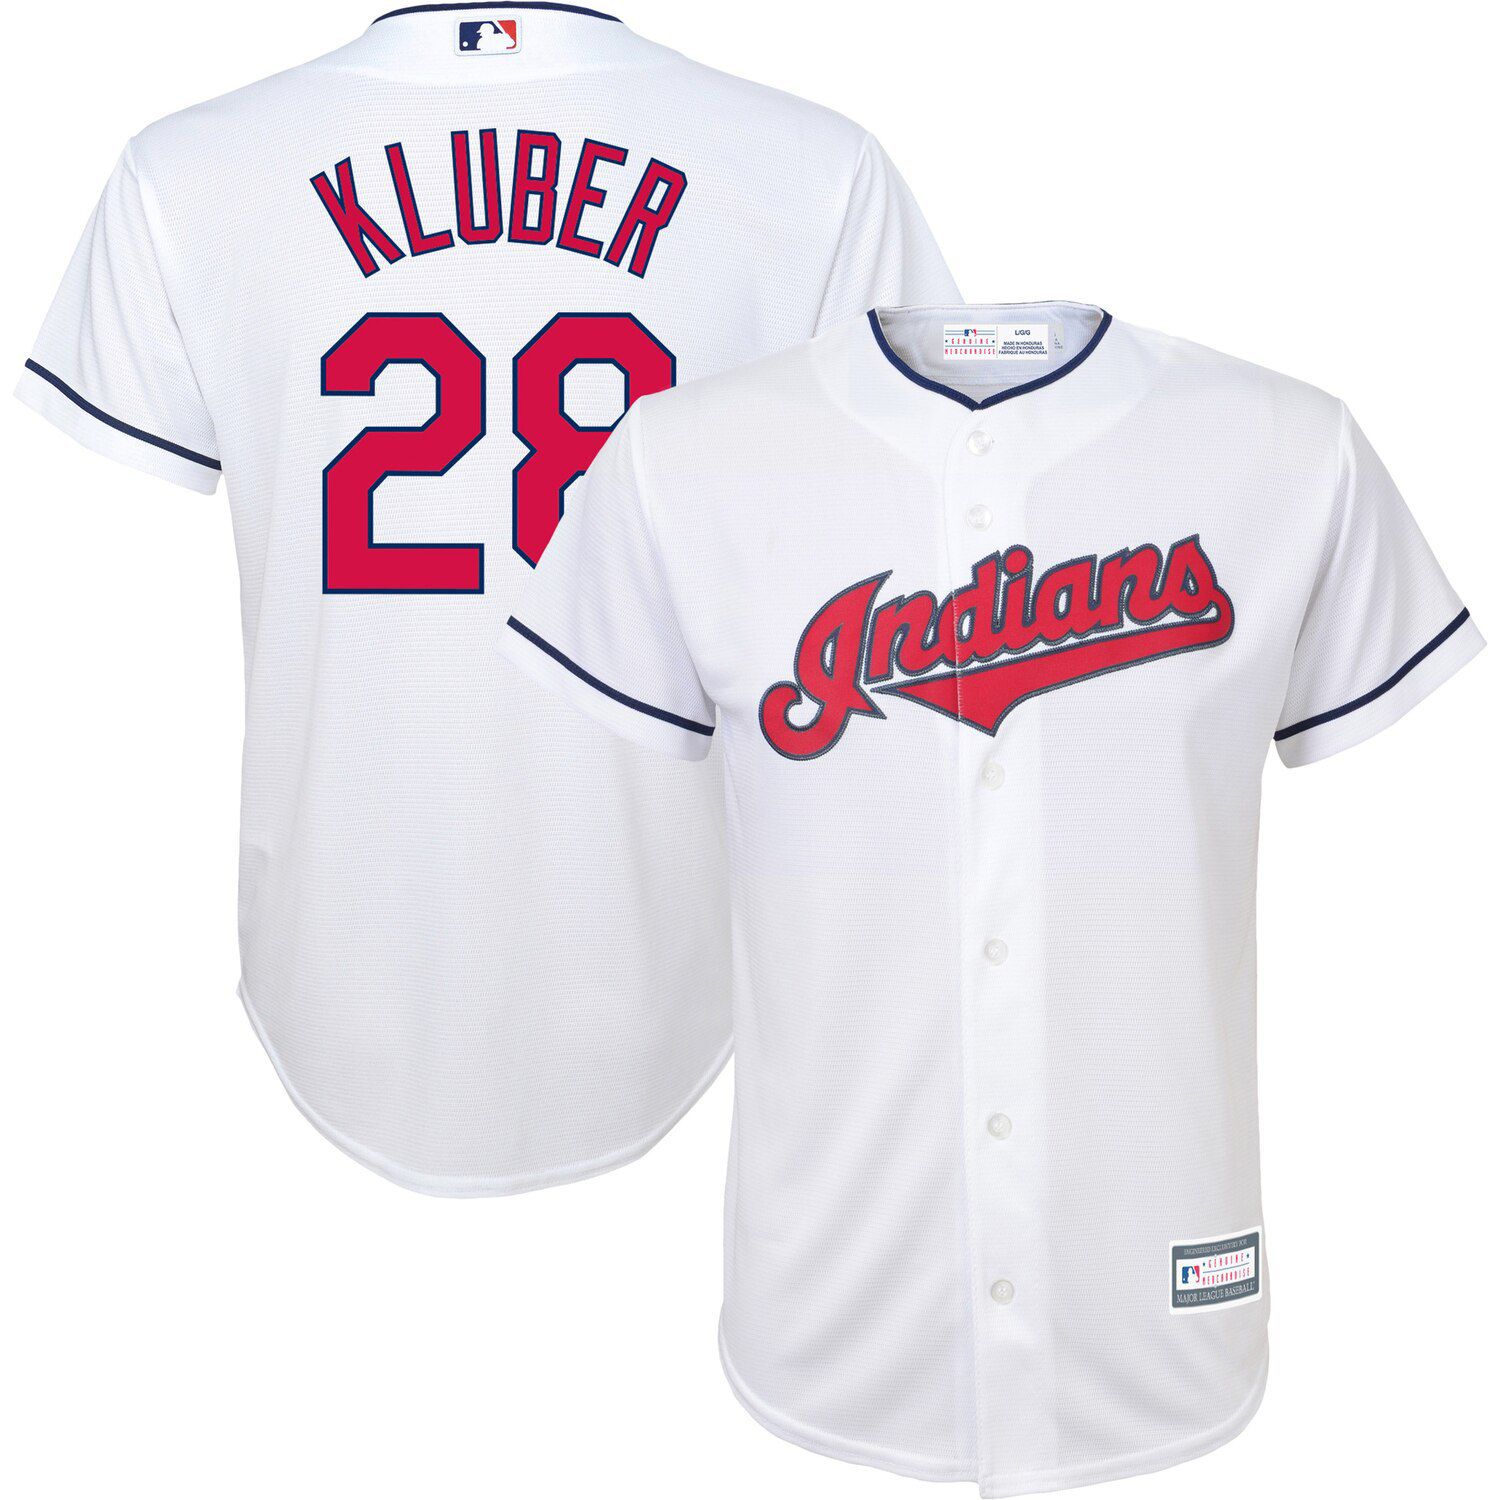 cleveland indians youth jersey